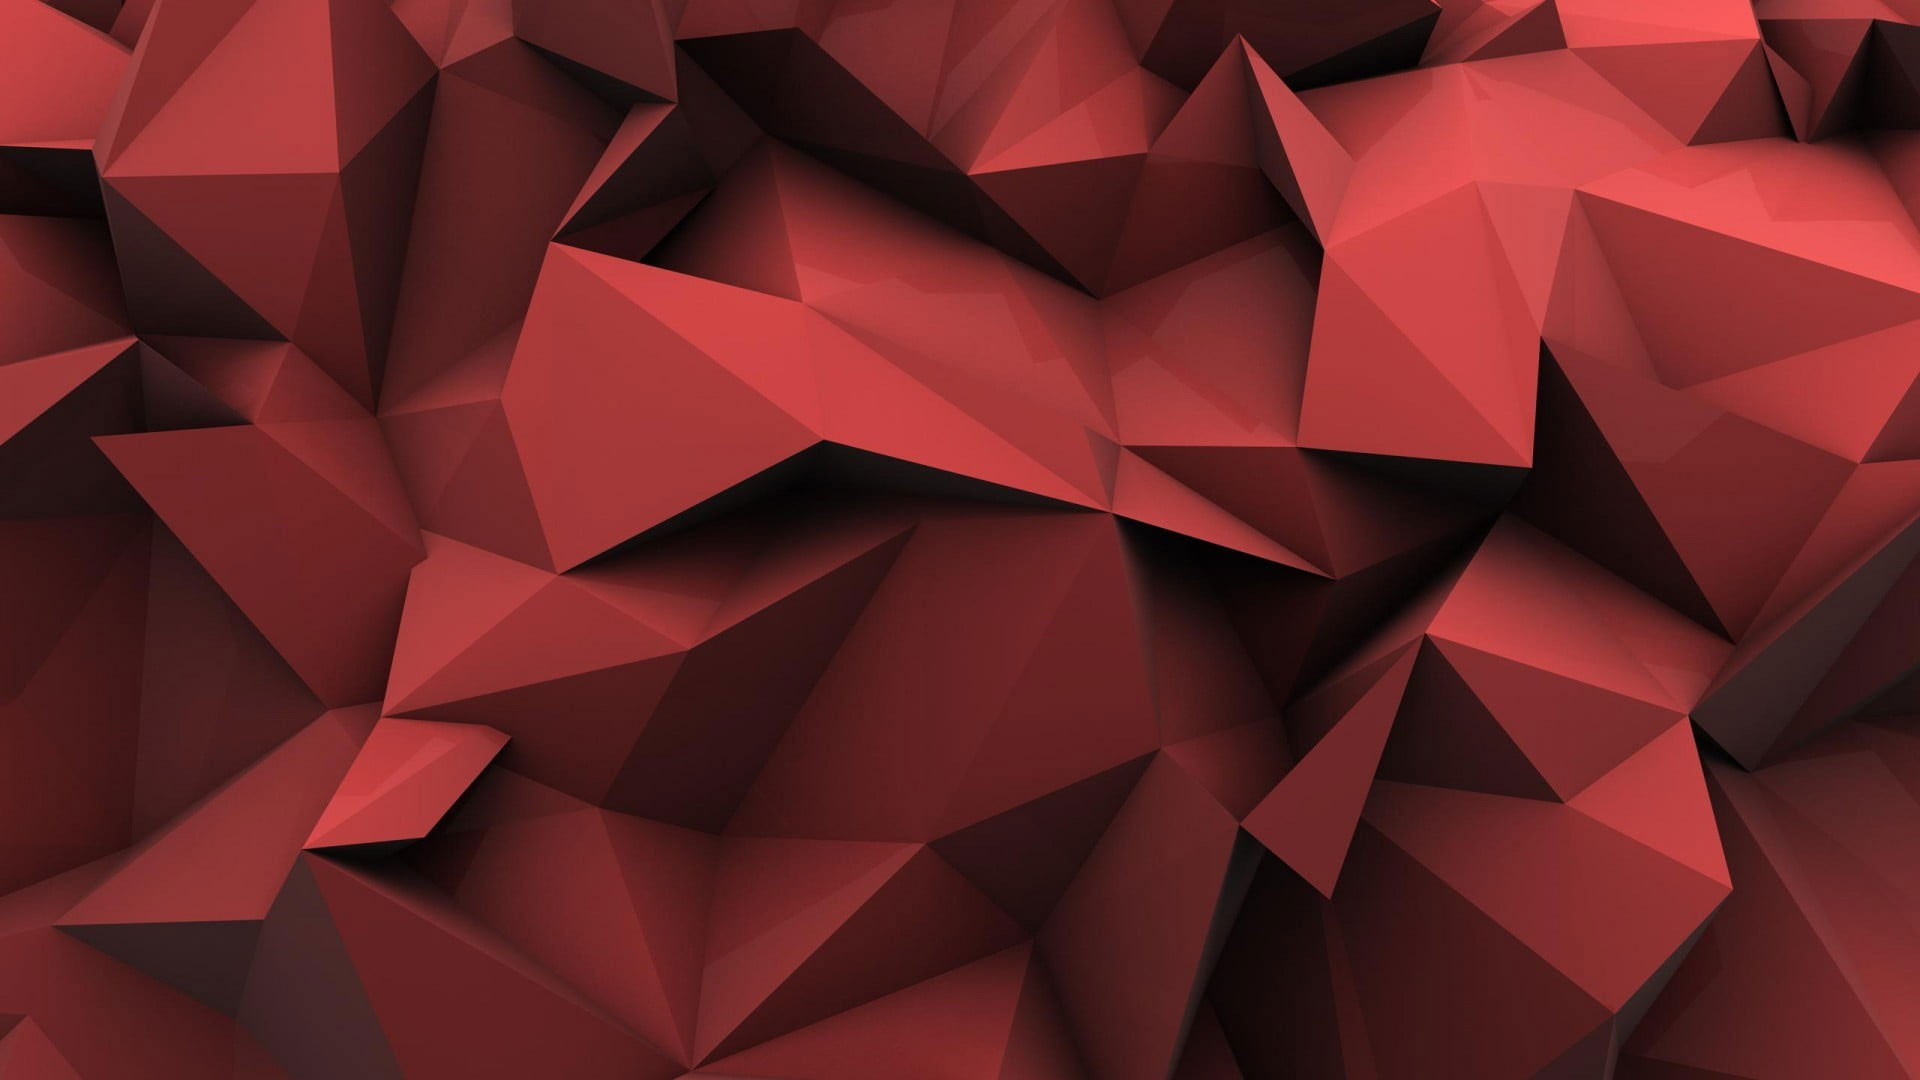 Polygon wallpaper, red and black origami wallpaper, minimalism, low poly, abstract • Wallpaper For You HD Wallpaper For Desktop & Mobile